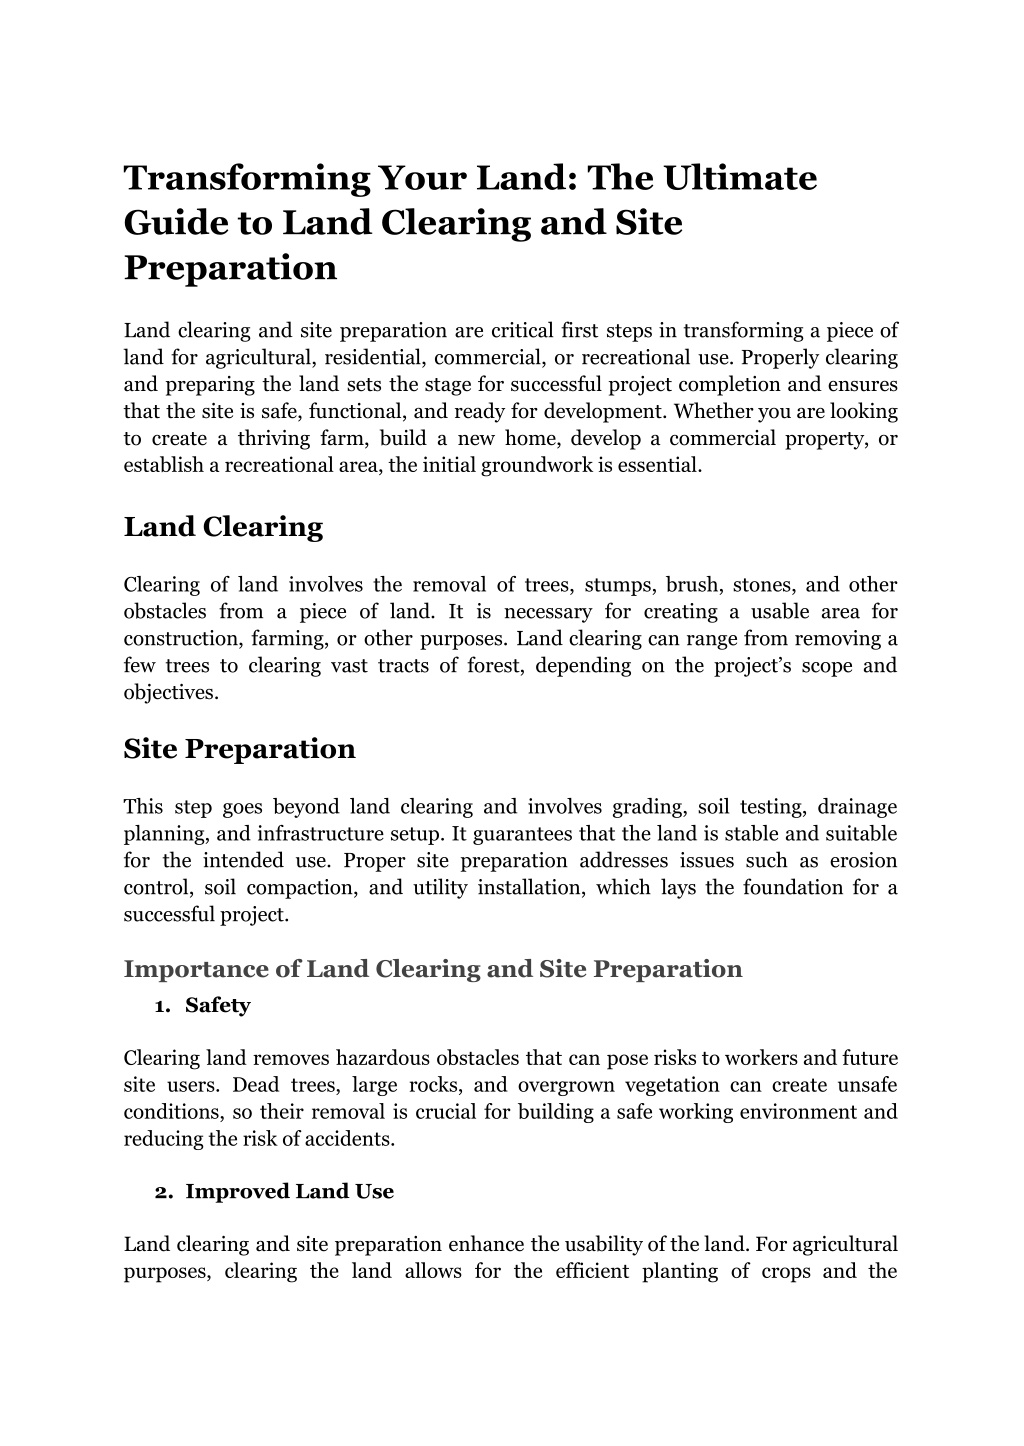 transforming your land the ultimate guide to land l.w